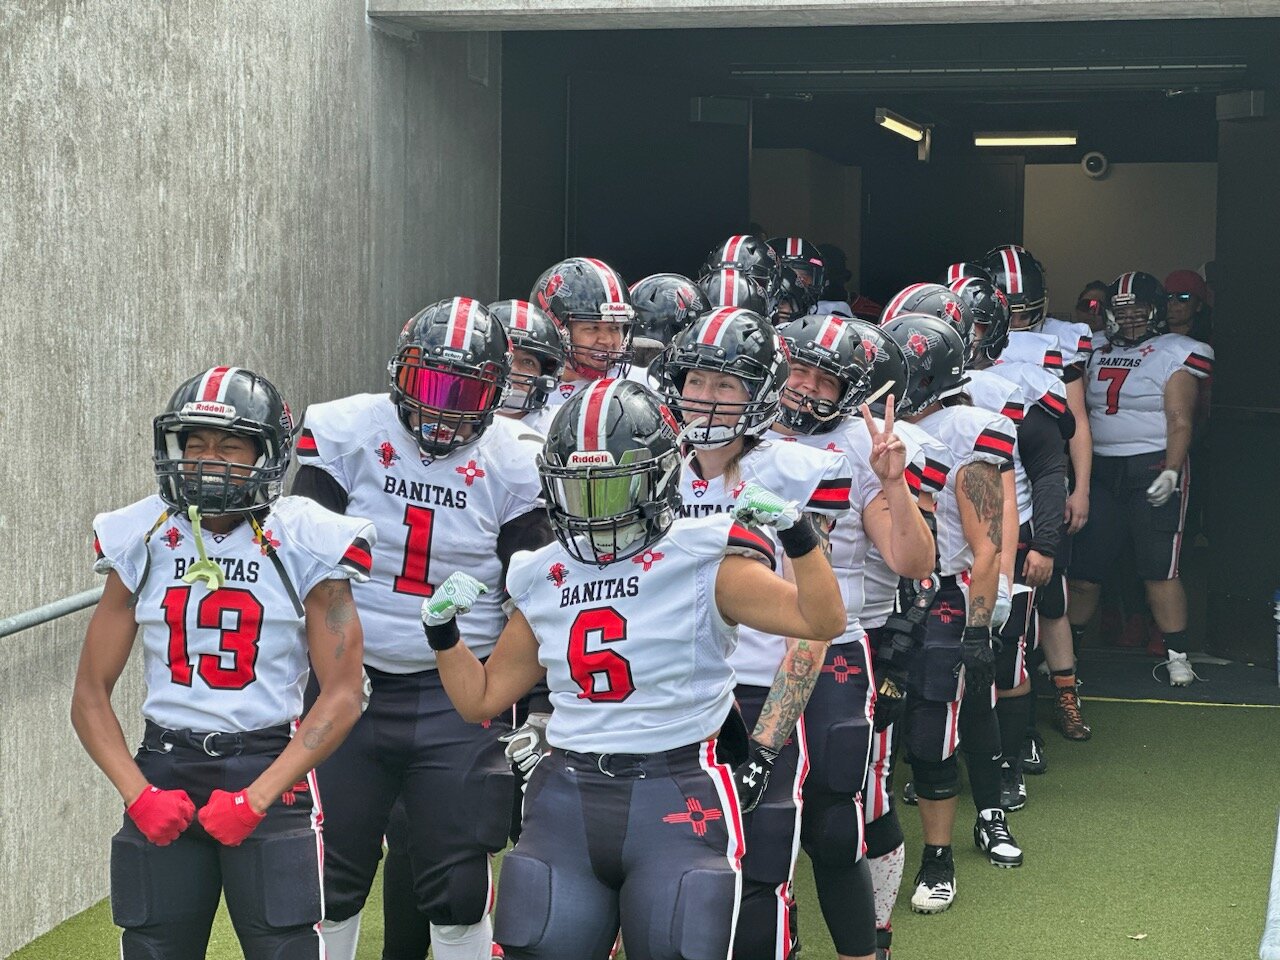 The New Mexico Banitas wait to come on the field before the Women’s Football Alliance (WFA) Division III American Conference National Championship game July 21 in Canton, Ohio.